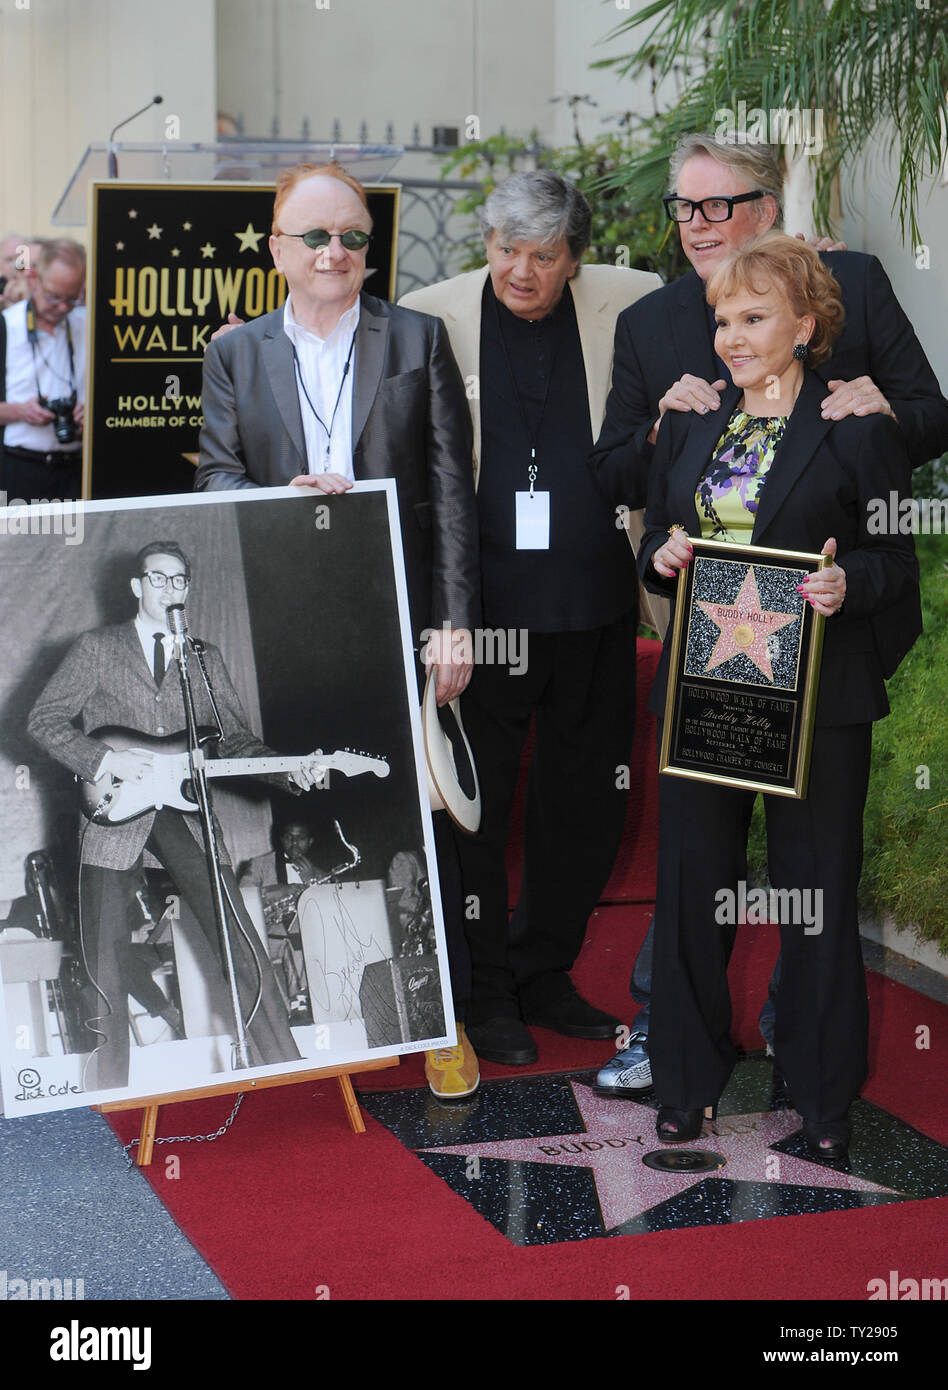 The late Buddy Holly receives a posthumous Walk of Fame Star on his 75th birthday on Vine Street in front of The Capitol Records Building, in Los Angeles on September 7, 2011.  L-R; John Asher, Phil Everly, Gary Busey and Maria Elena Holly in front of Buddy Holly's star.   UPI/Jayne Kamin-Oncea Stock Photo